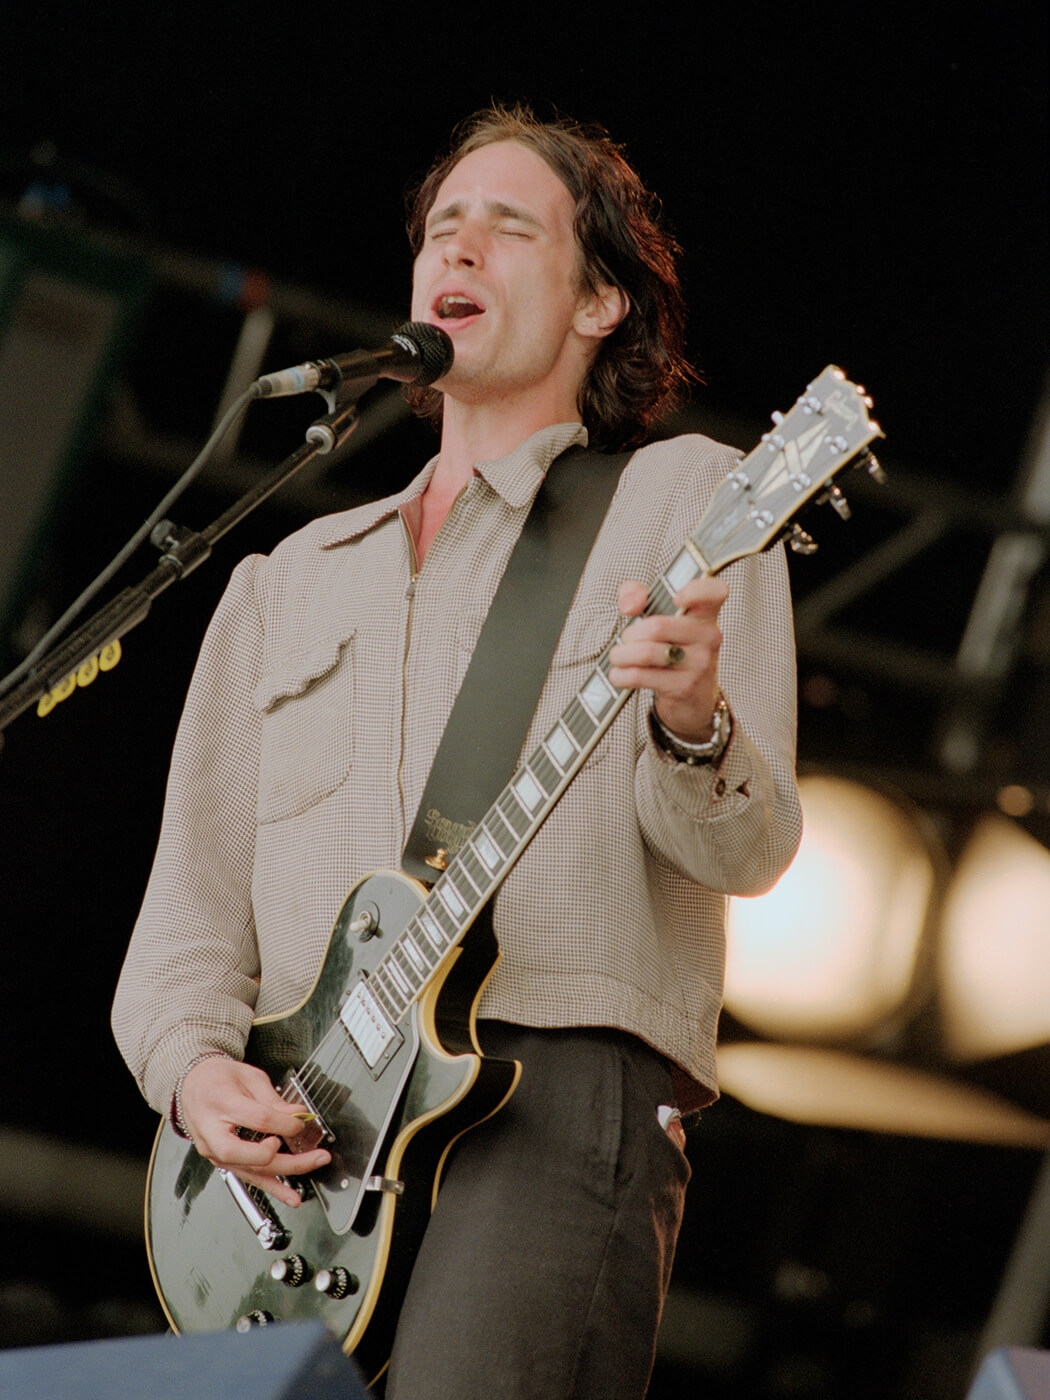 Jeff Buckley performing at Glastonbury in 1995, photo by Brian Rasic/Getty Images